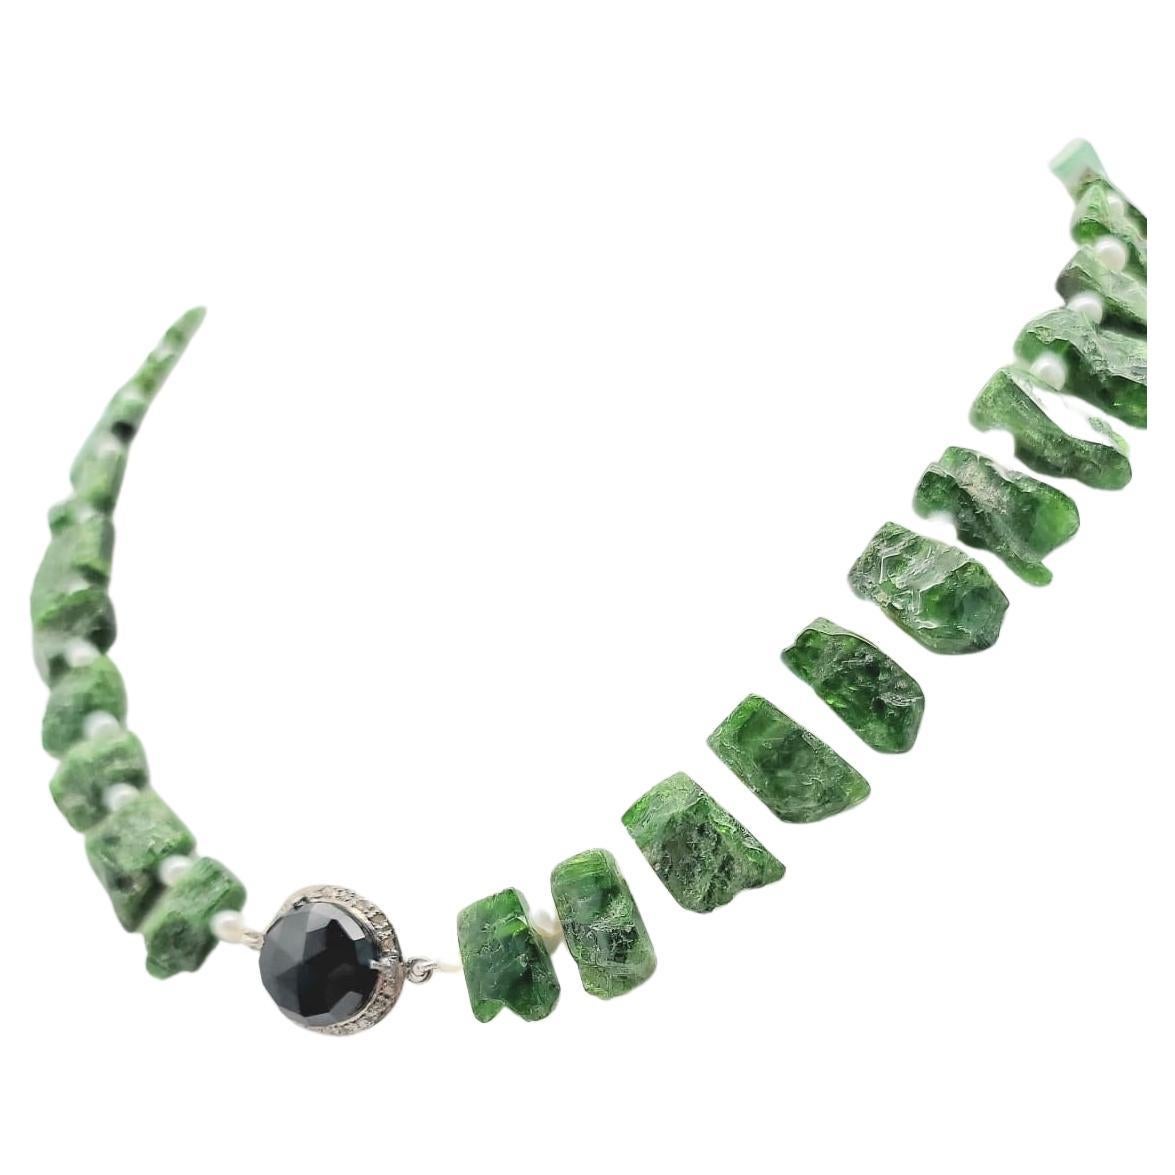 One-of-a-Kind

Introducing a truly stunning necklace, featuring vivid deep green chrome Diopside gemstones. This recently discovered gemstone is found almost exclusively in Eastern Siberia and is known as Inagli. Each stone in this necklace has been